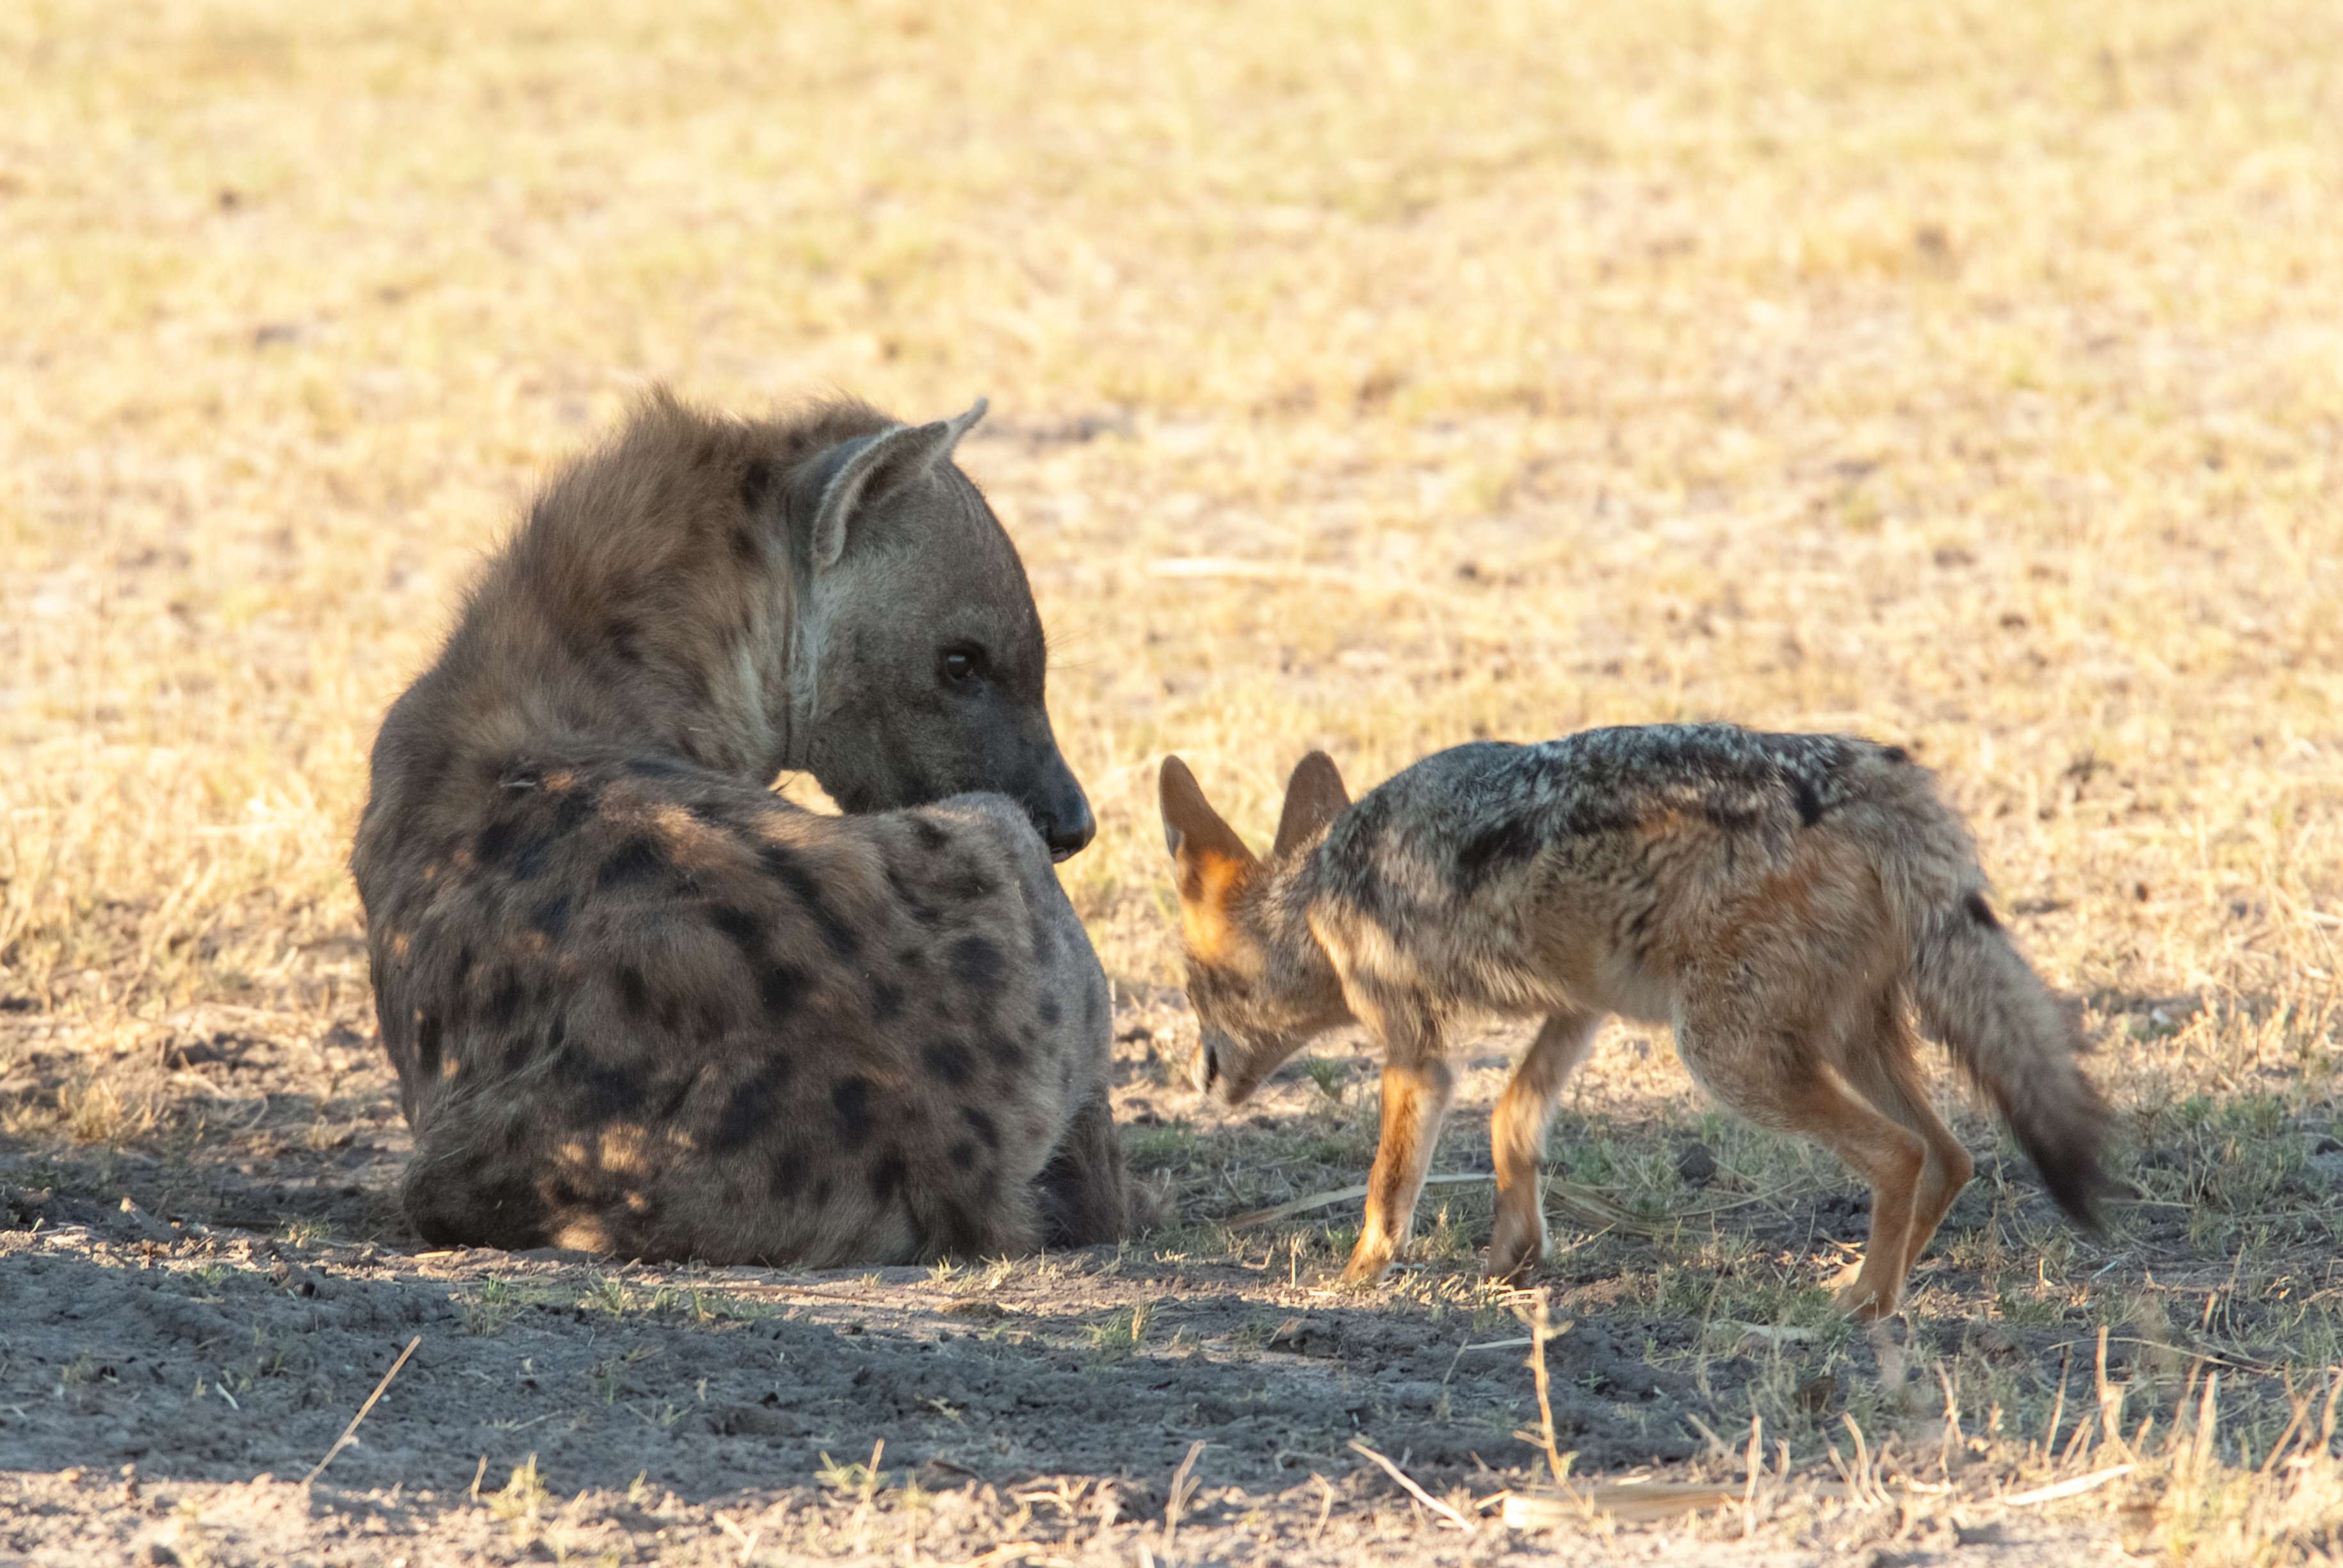 Face-off between a spotted hyena and a black-backed jackal in the Okavango delta. © WWF-US/Rachel Kramer